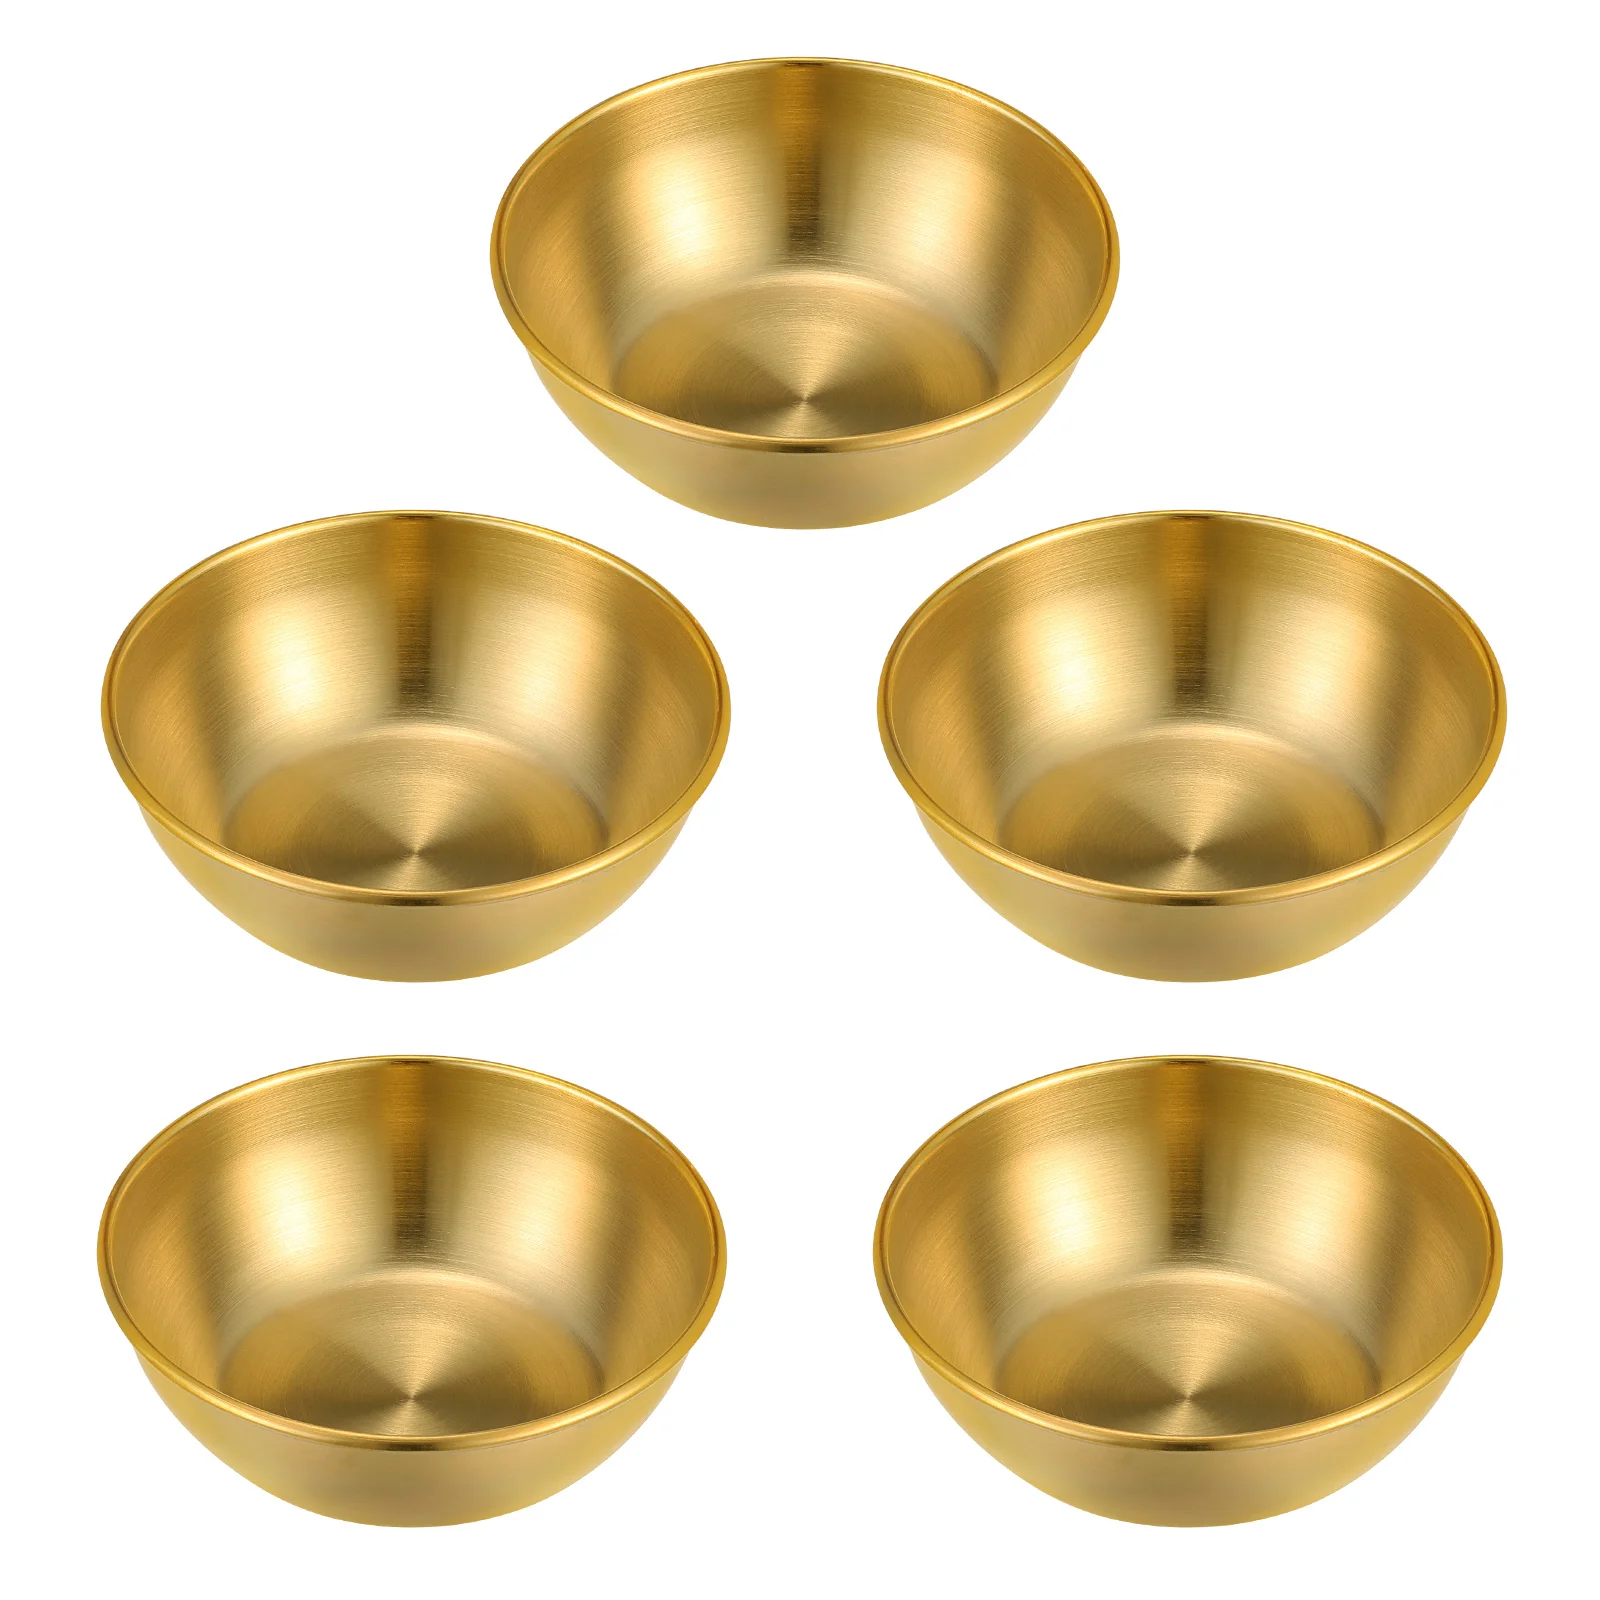 

5 Pcs Stainless Steel Dipping Sauce Bowl Round Gold Bowls Sushi Tray Appetizer Serving Metal Seasoning Plates Condiment Servers